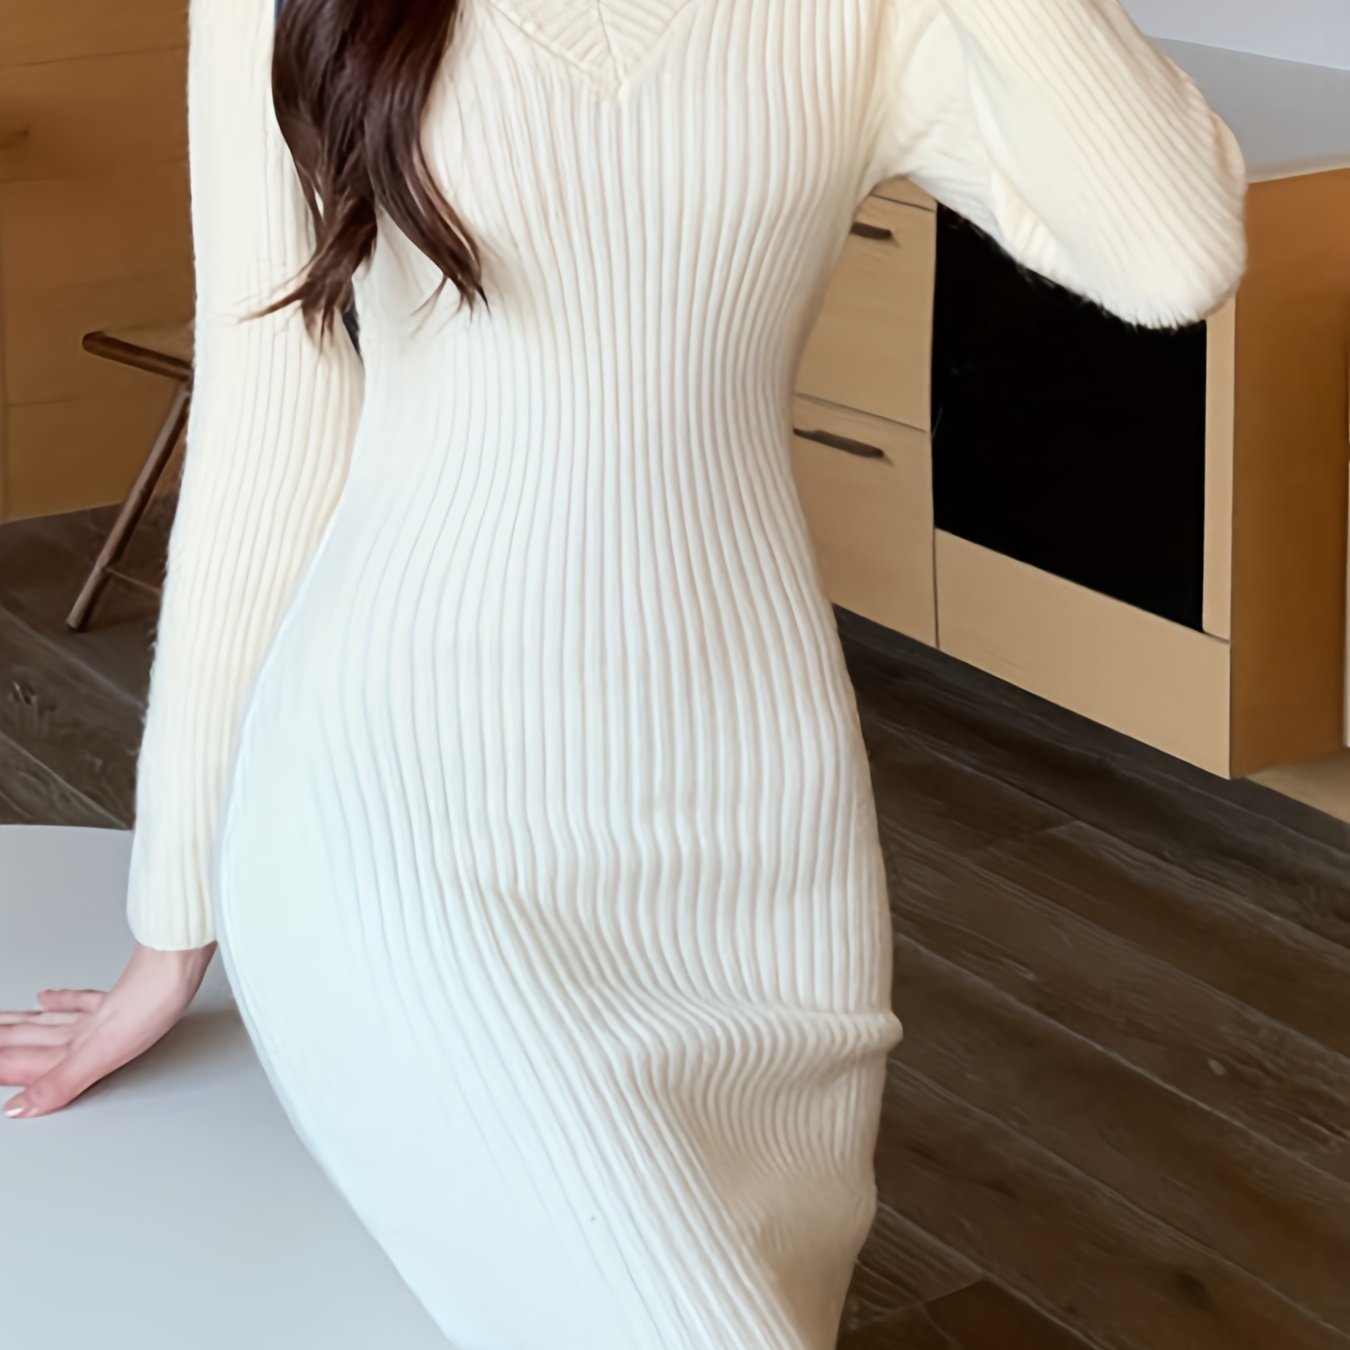 Antmvs Solid Knit Sweater Dress, Elegant V Neck Long Sleeve Bodycon Dress For Fall & Winter, Women's Clothing